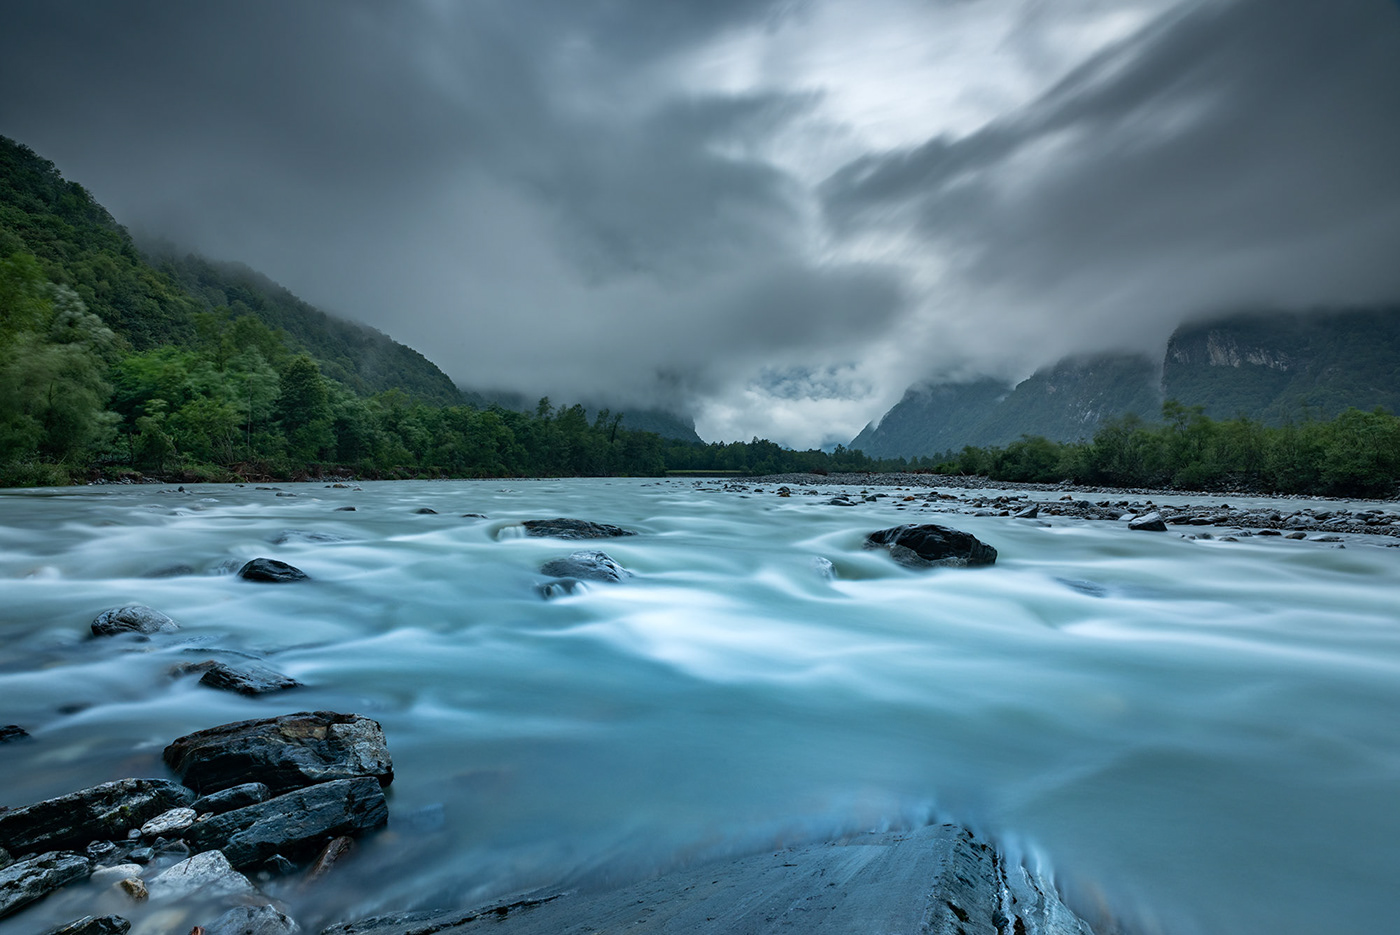 Dramatic and moody landscape photography of the Maggia Valley in Ticino by Jennifer Esseiva.